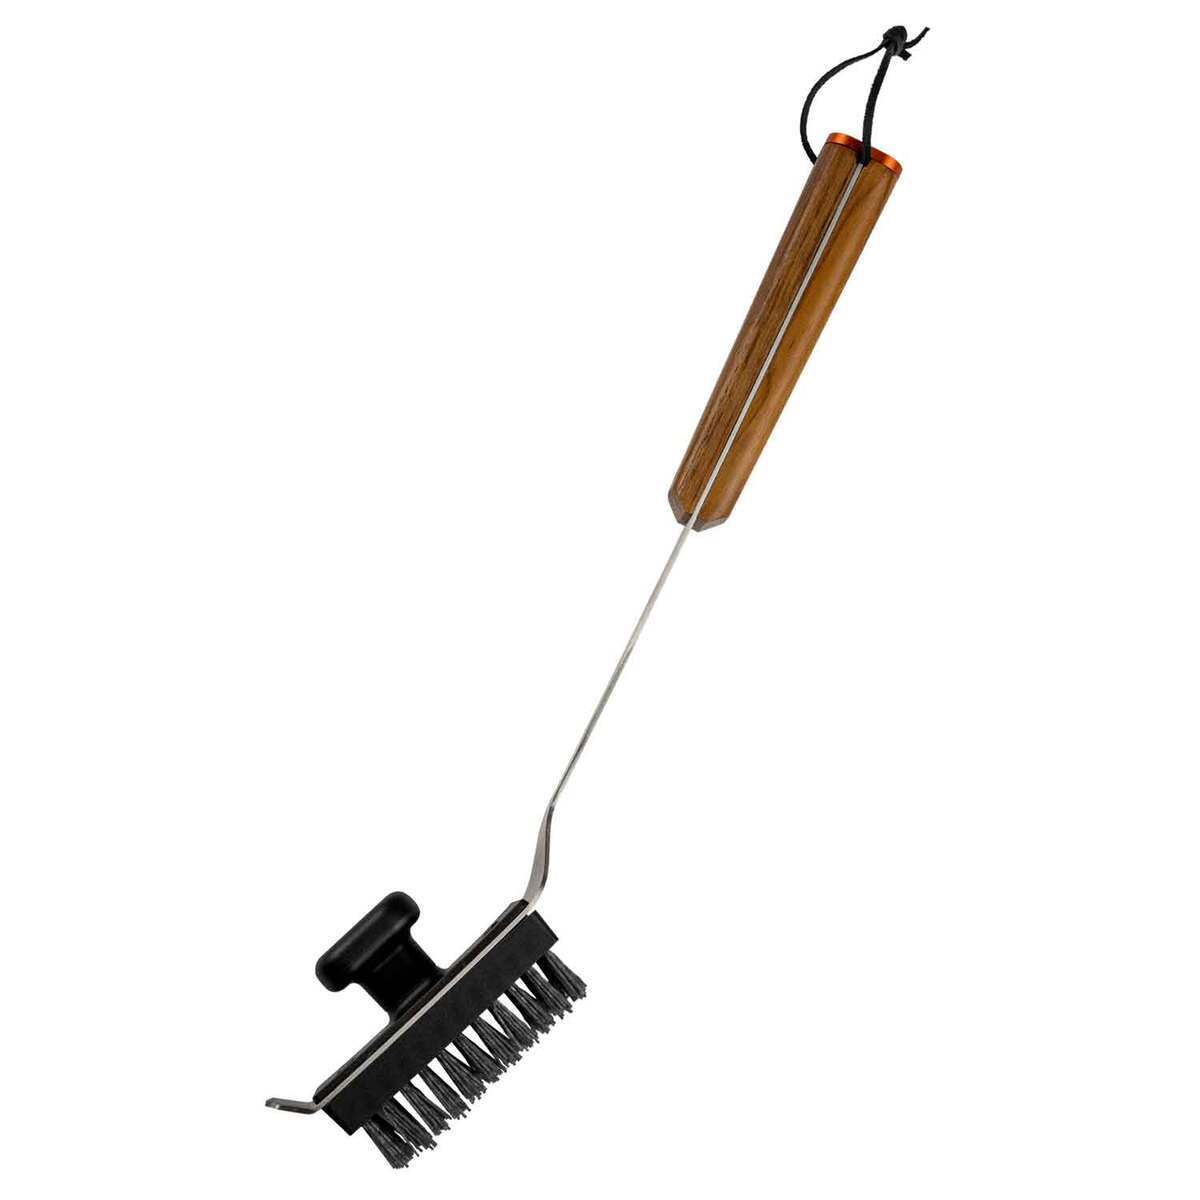  Traeger Pellet Grills BAC537 BBQ Cleaning Brush